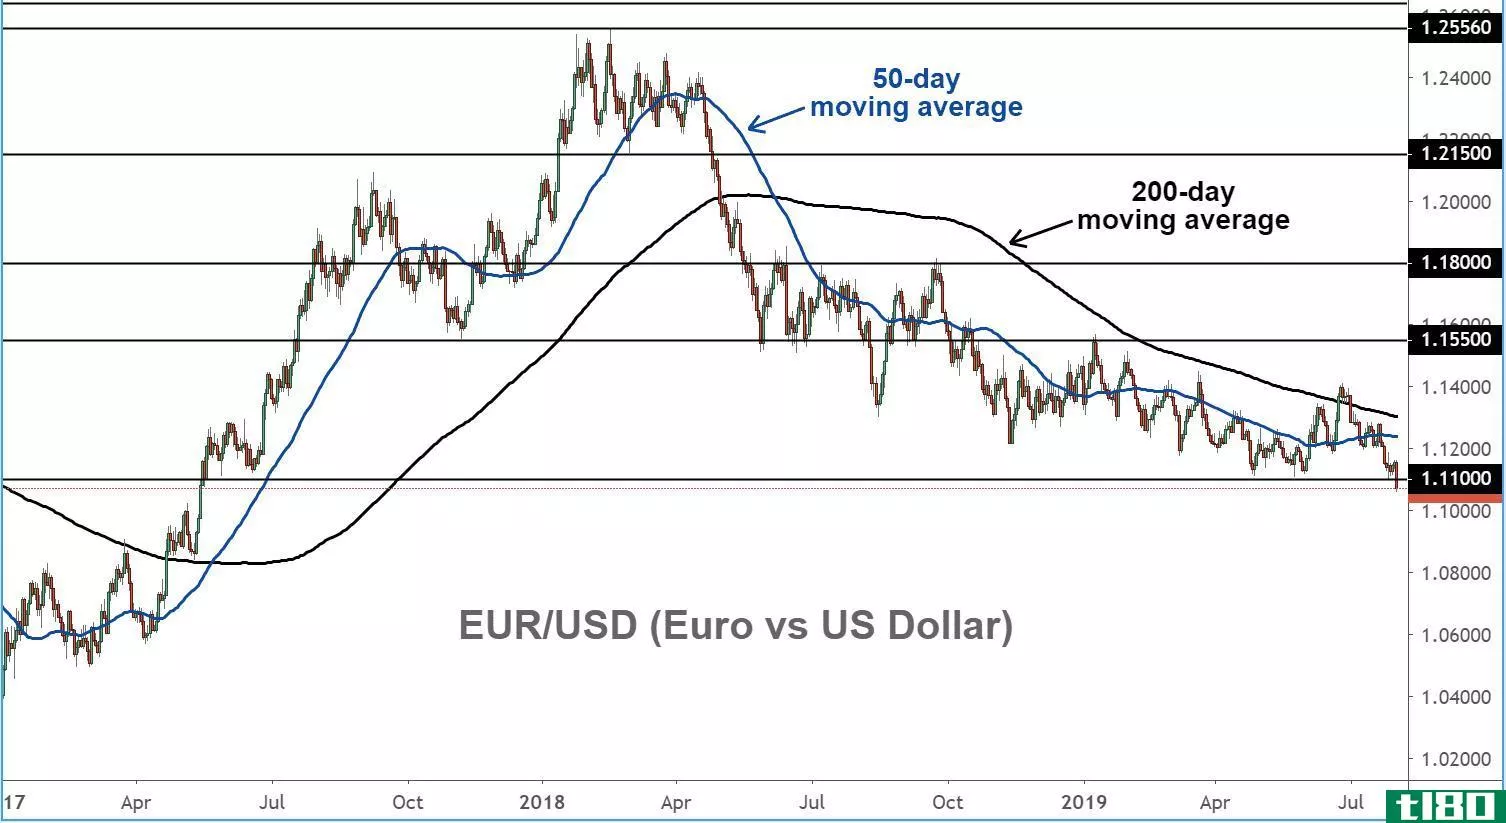 Chart showing the performance of the euro vs. the U.S. dollar